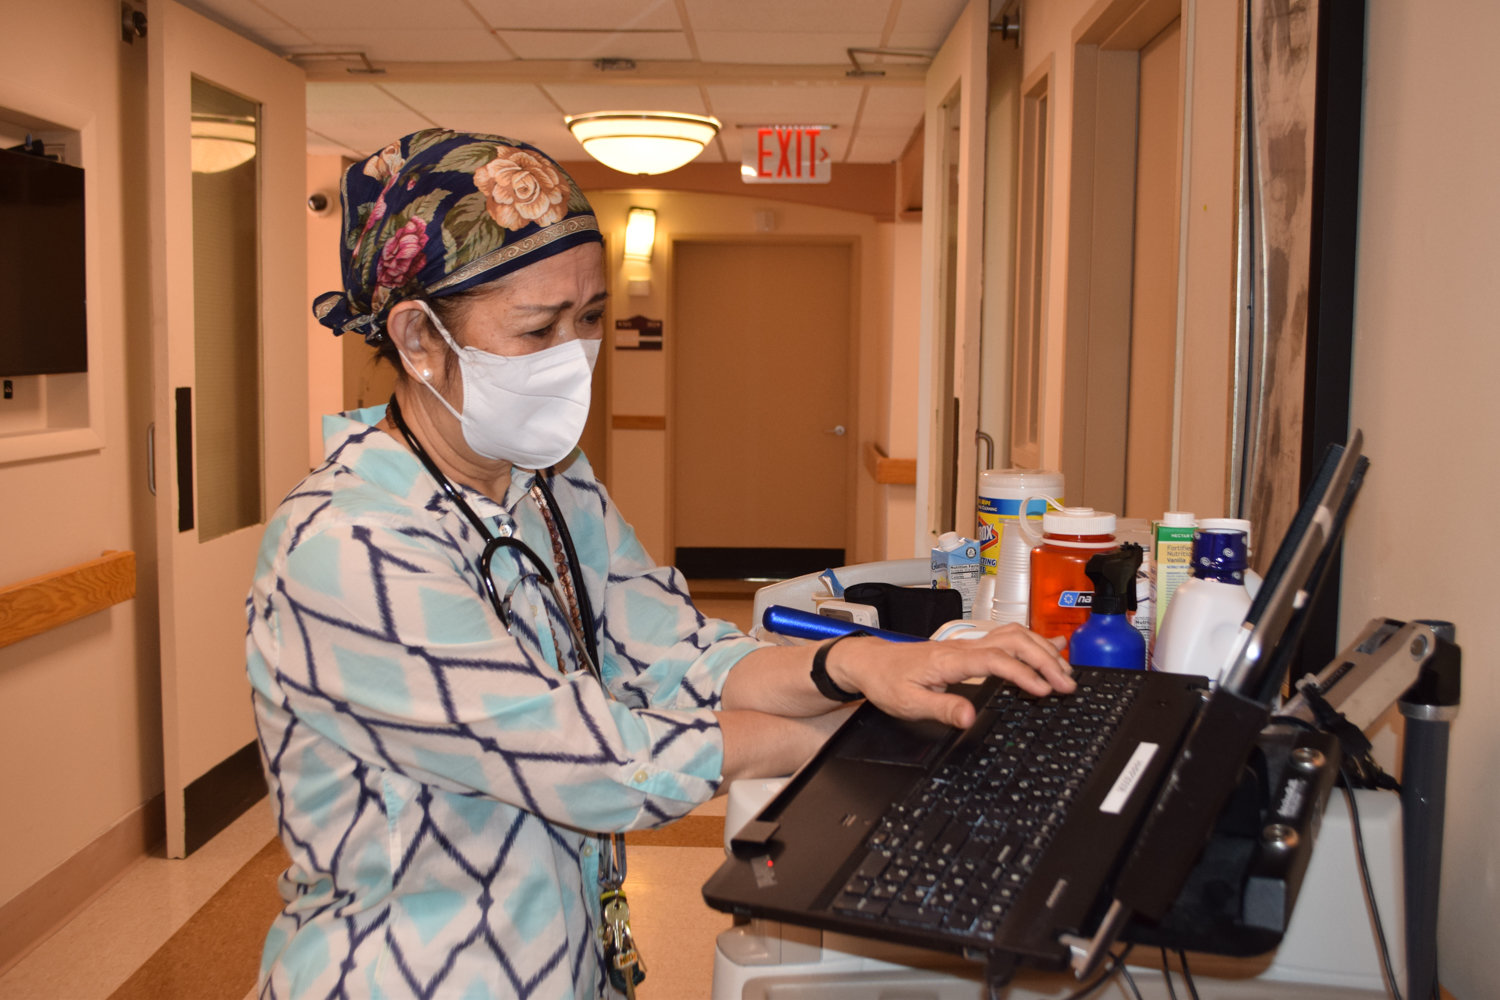 Christine Castro, a nurse at the Hebrew Home at Riverdale, wears personal protective equipment while working her station during the coronavirus pandemic that has claimed 25 lives at the Palisade Avenue facility as of earlier this week.